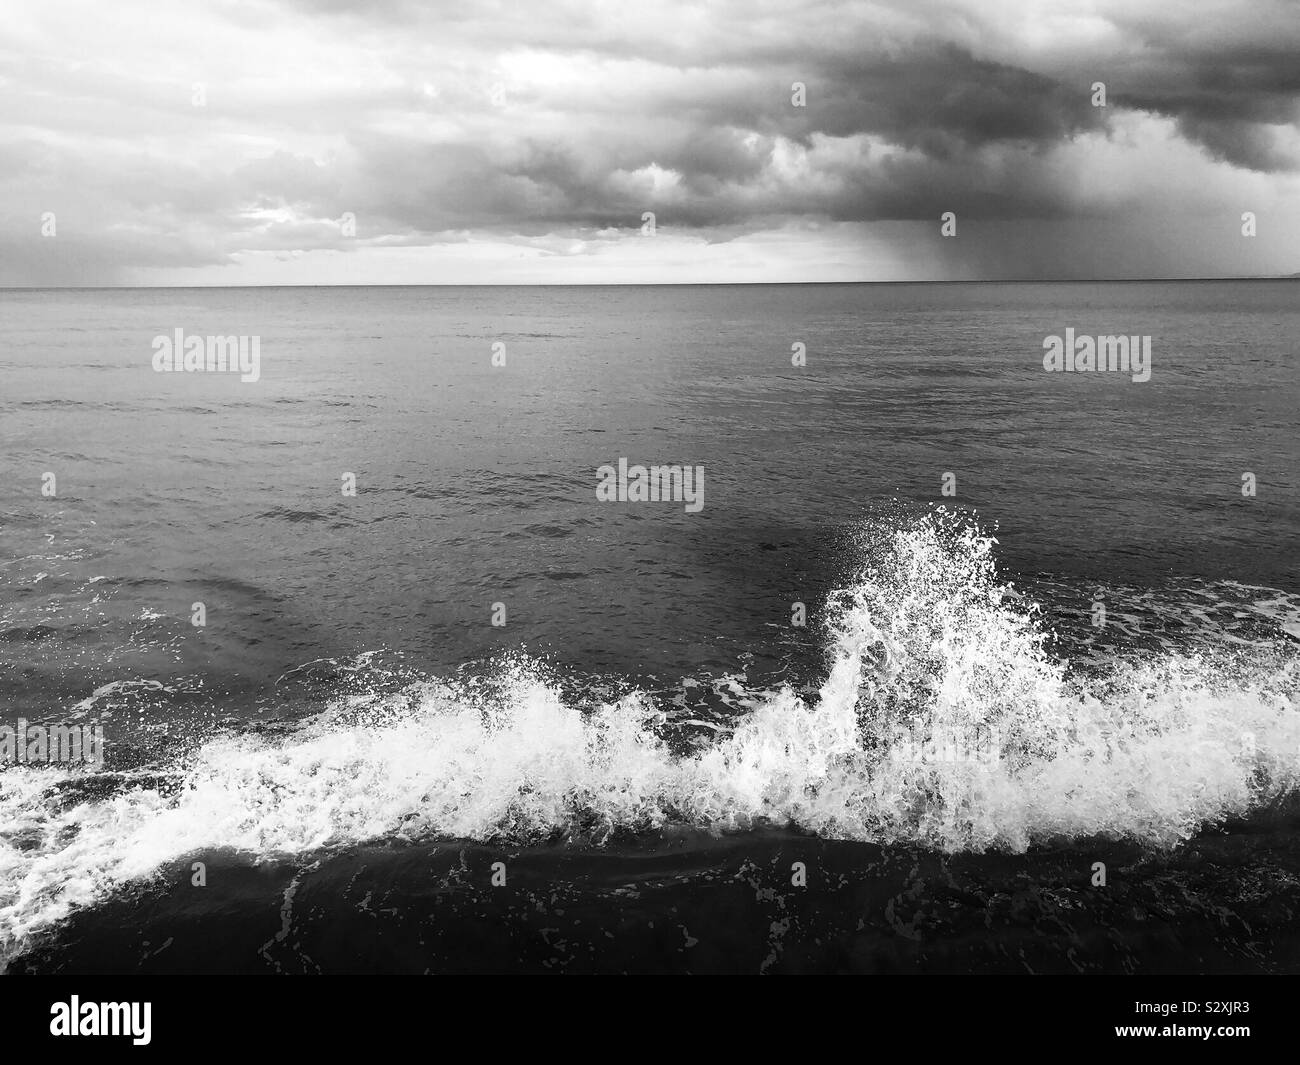 Black and white image of a breaking wave at high tide with rain falling in the distance Stock Photo